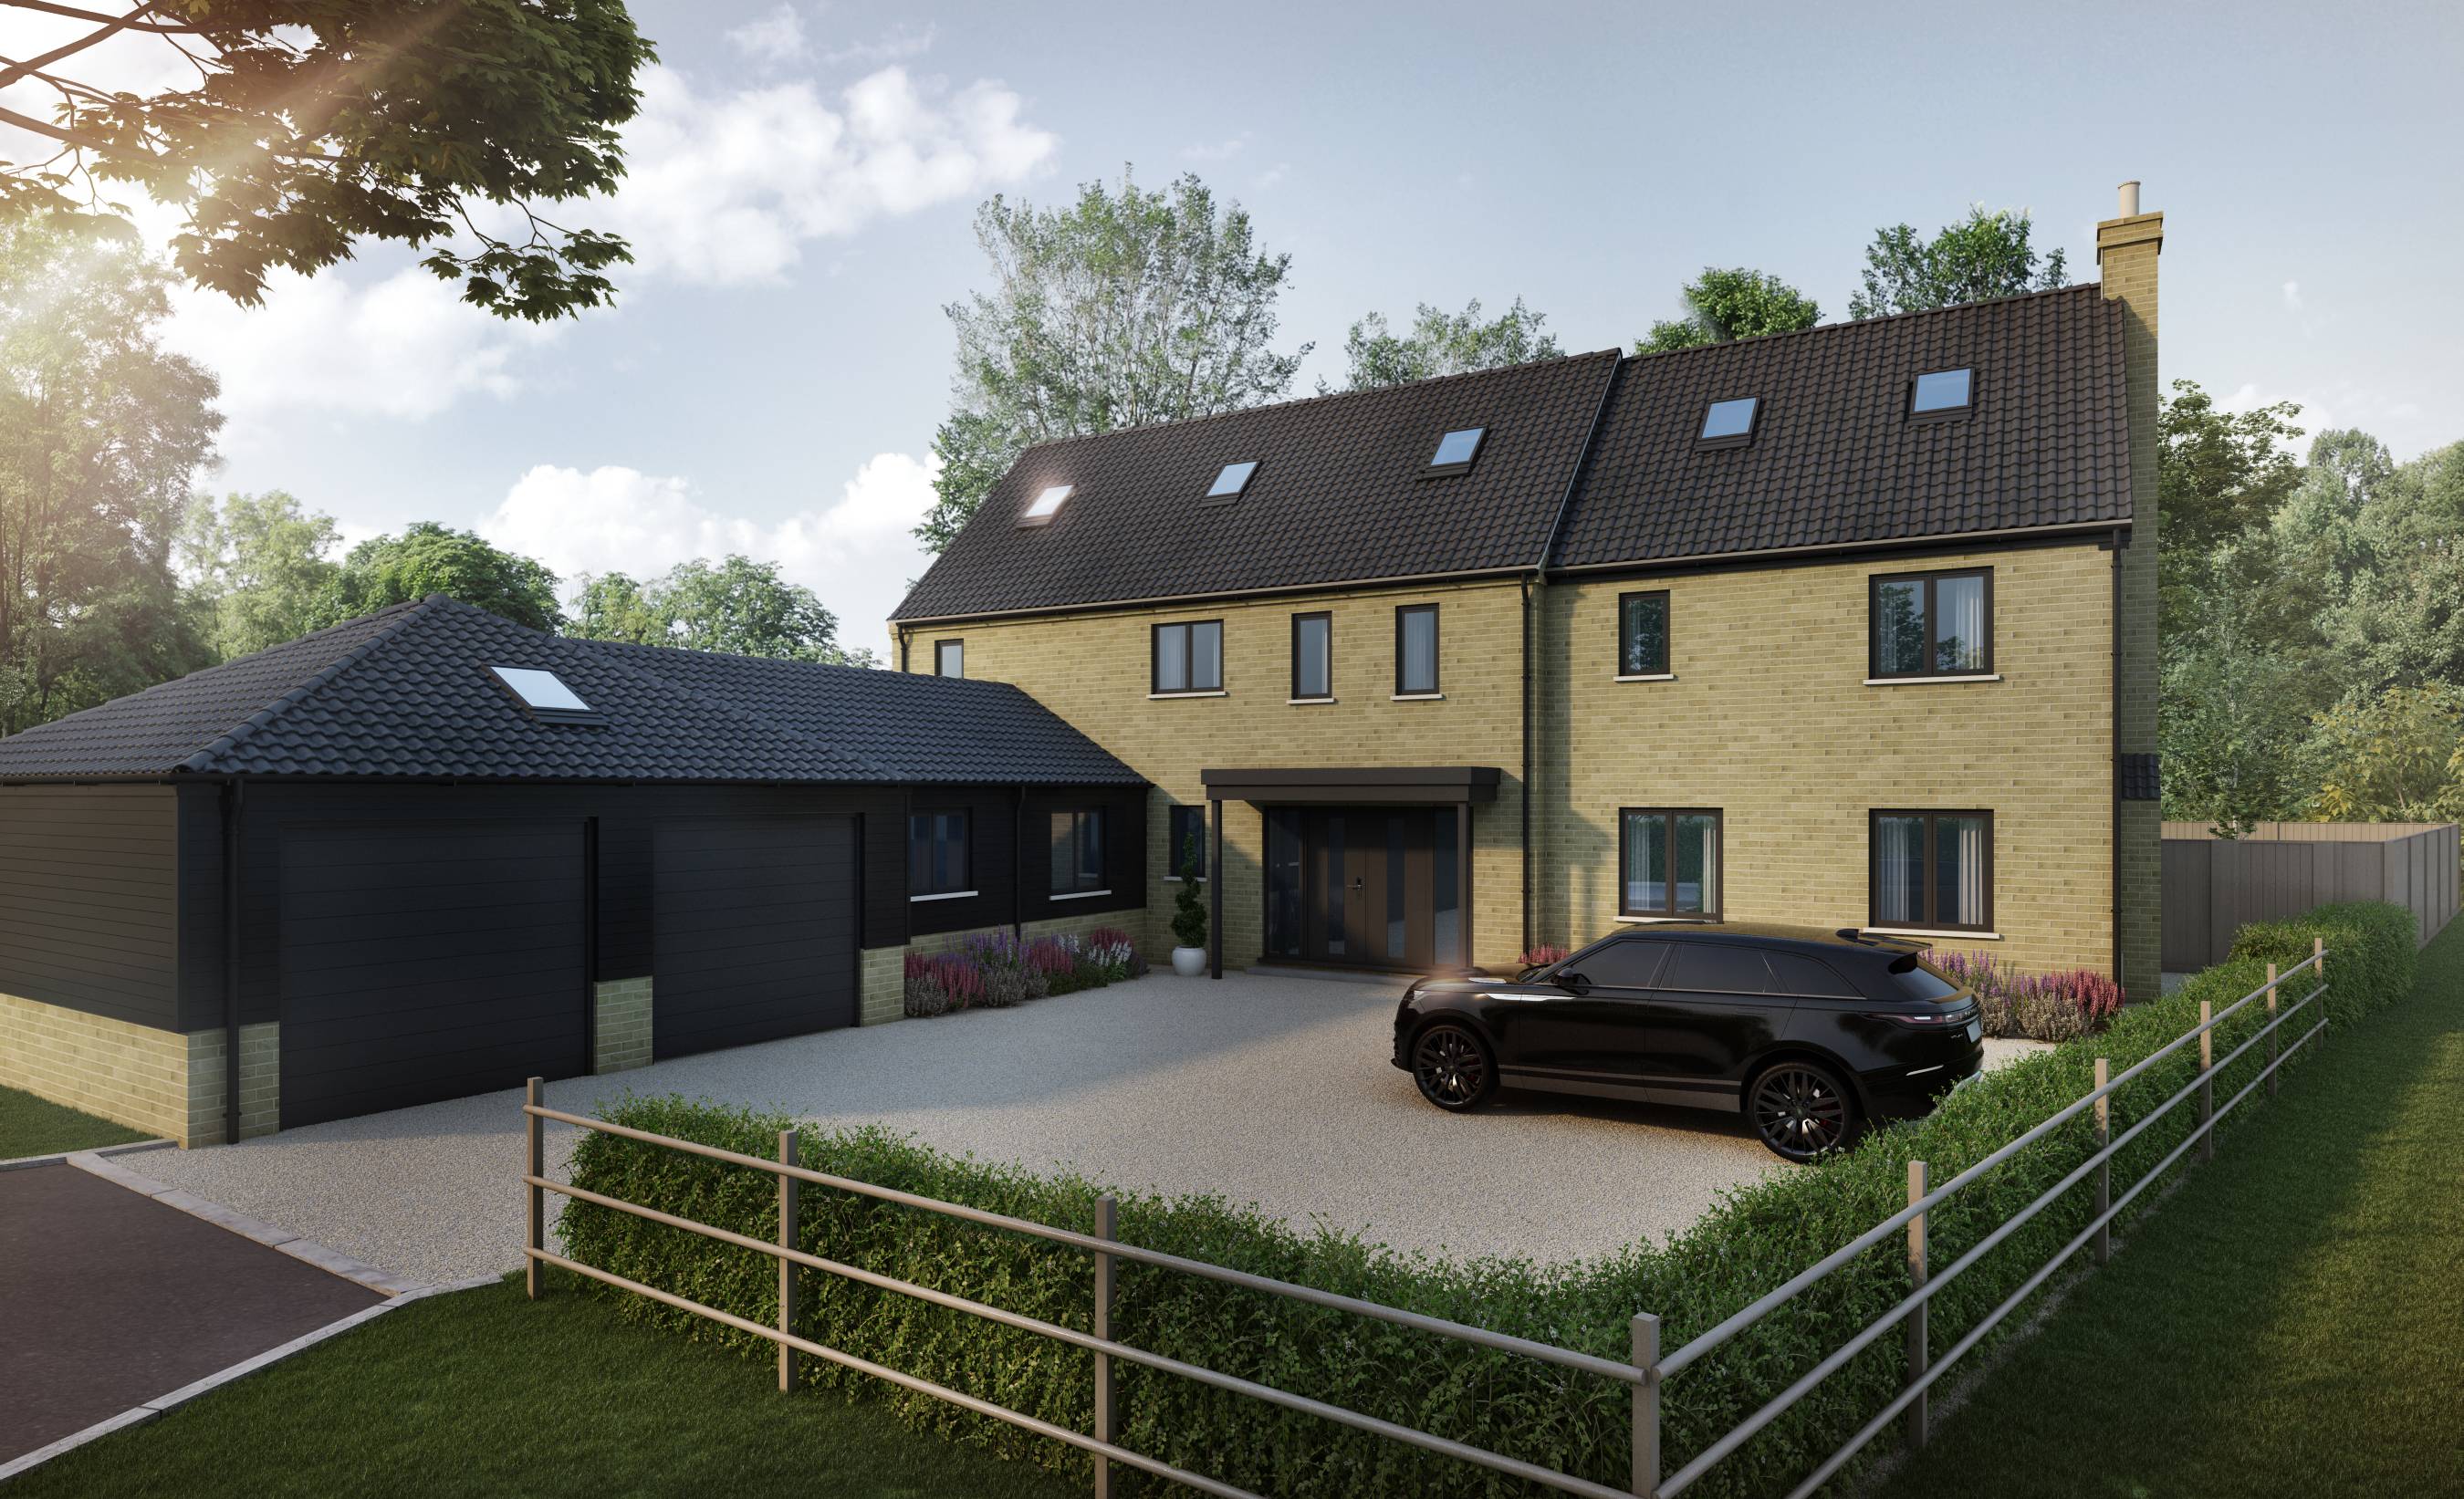 NEW BUILD, STUNNING DETACHED, FIVE BEDROOM, FIVE BATHROOM HOUSE LOCATED IN THE PICTURESQUE VILLAGE OF DODDINGTON.